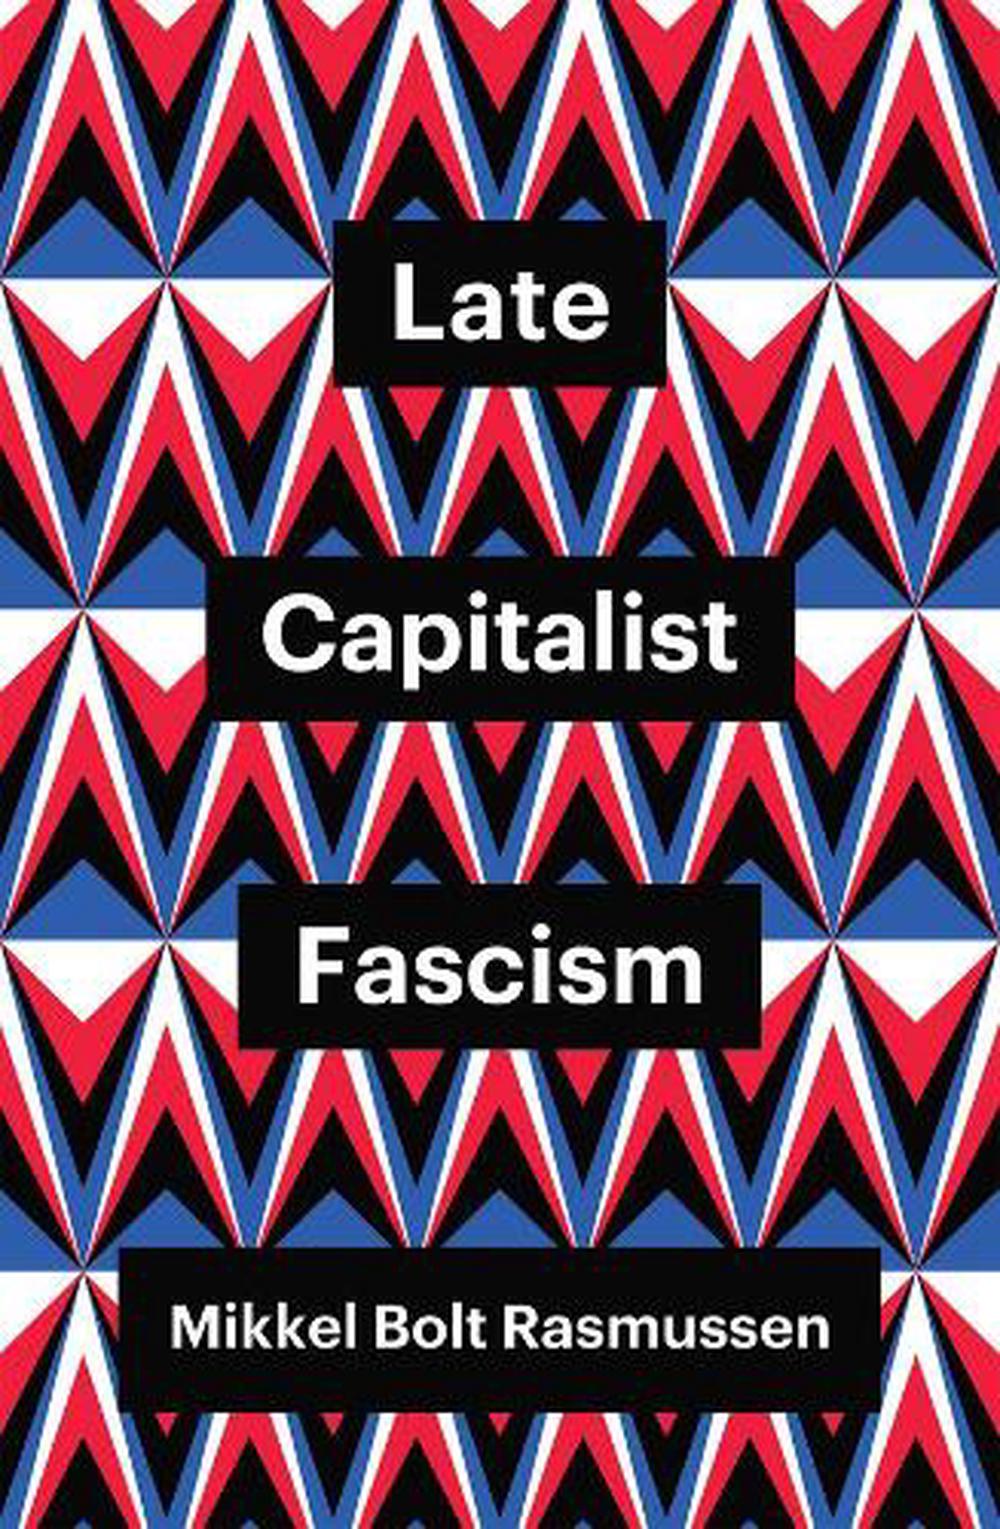 Late　Paperback,　Bolt　Buy　online　Fascism　Capitalist　by　The　Rasmussen,　Mikkel　at　9781509547449　Nile